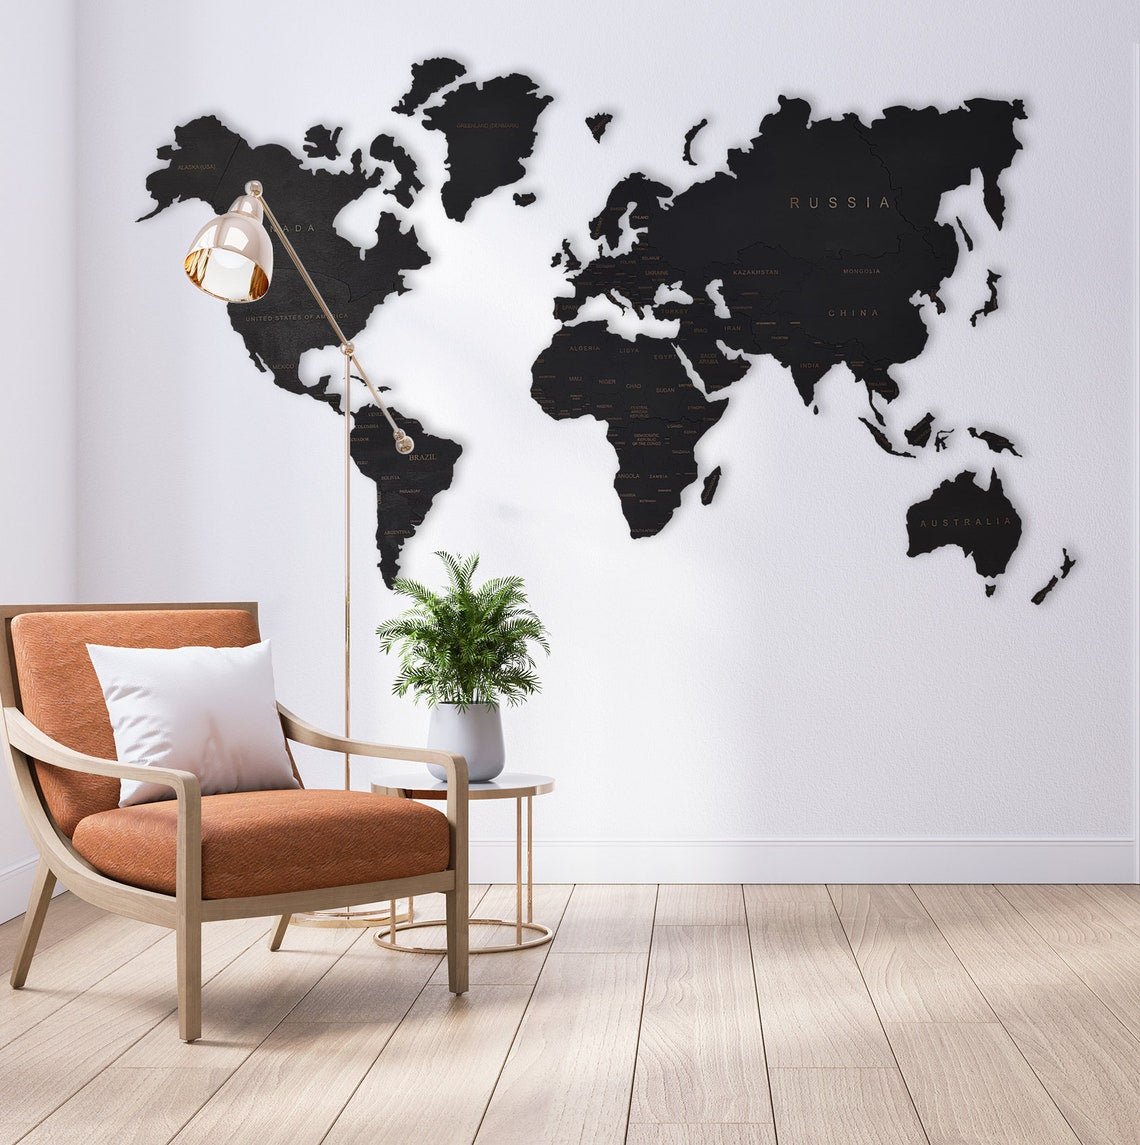 Wooden World Map Rustic Wall Art Home Decor Large Travel Map Wood